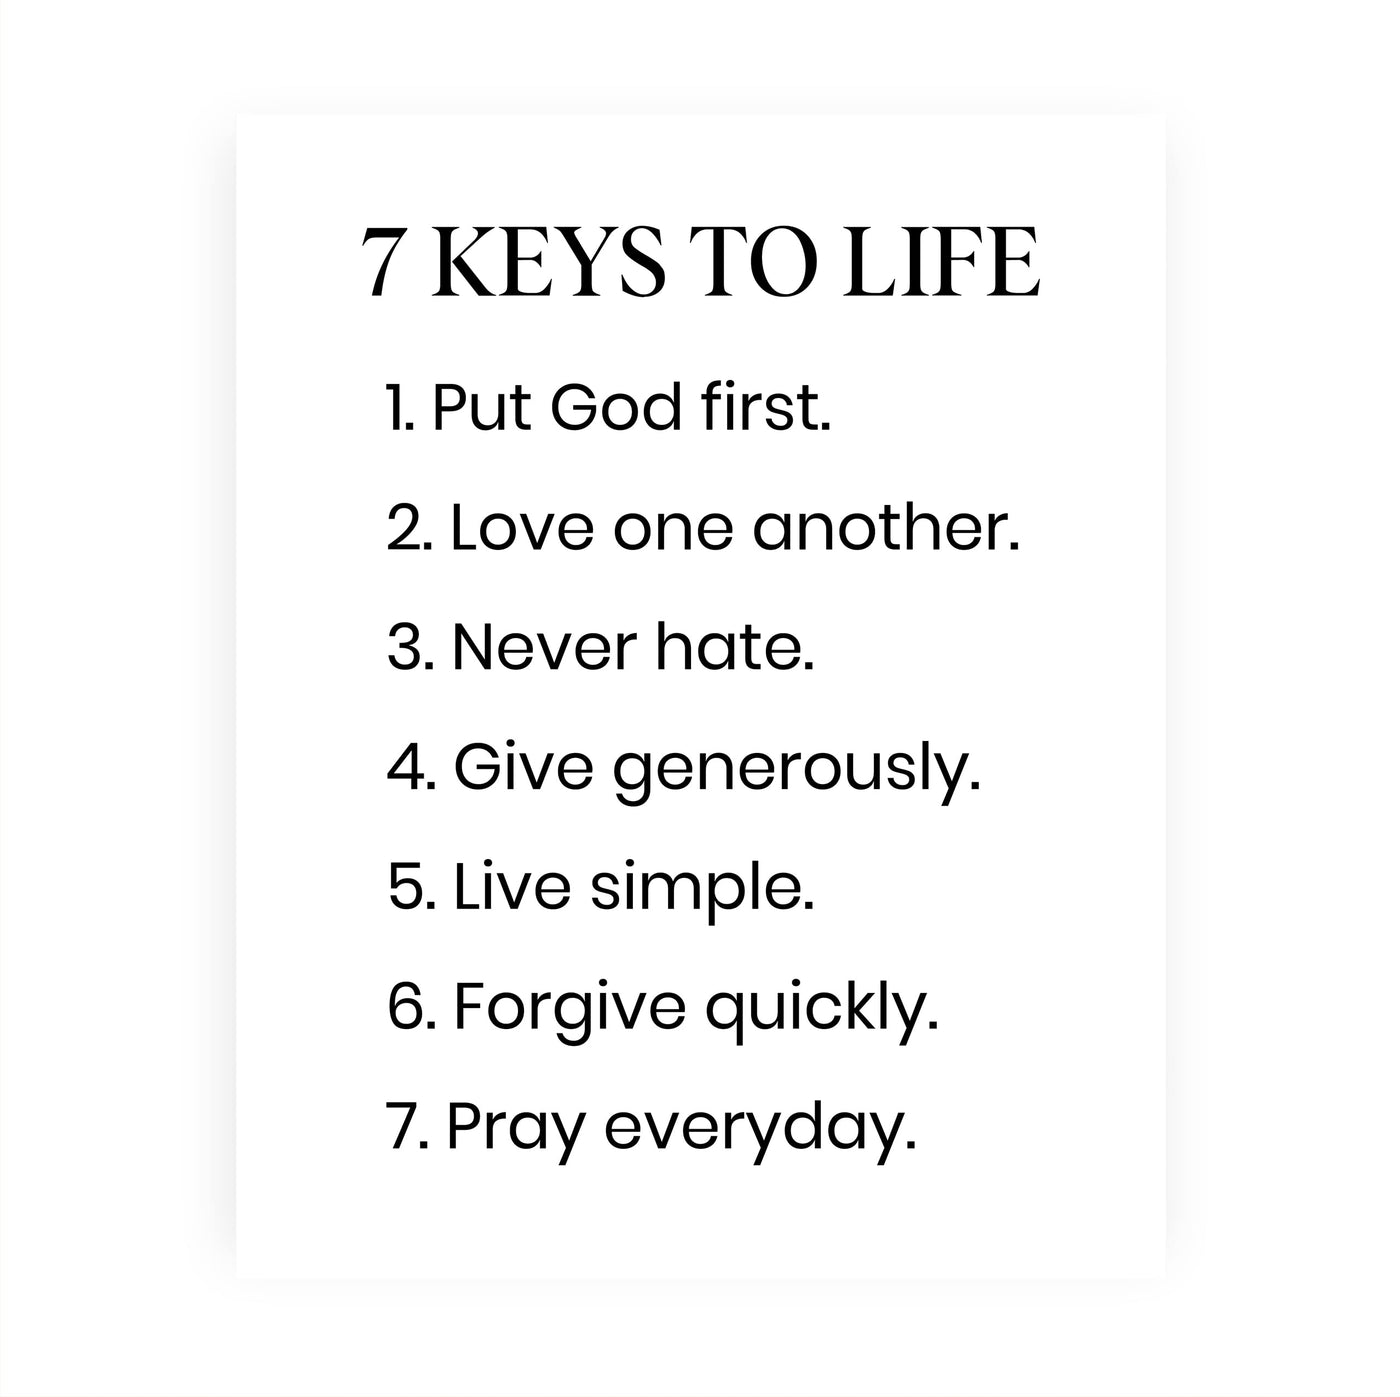 7 Keys to Life -Put God First Inspirational Quotes Wall Sign -8 x 10" Motivational Christian Poster Print -Ready to Frame. Positive Home-Office-Classroom-Church Decor. Perfect Life Lessons for All!